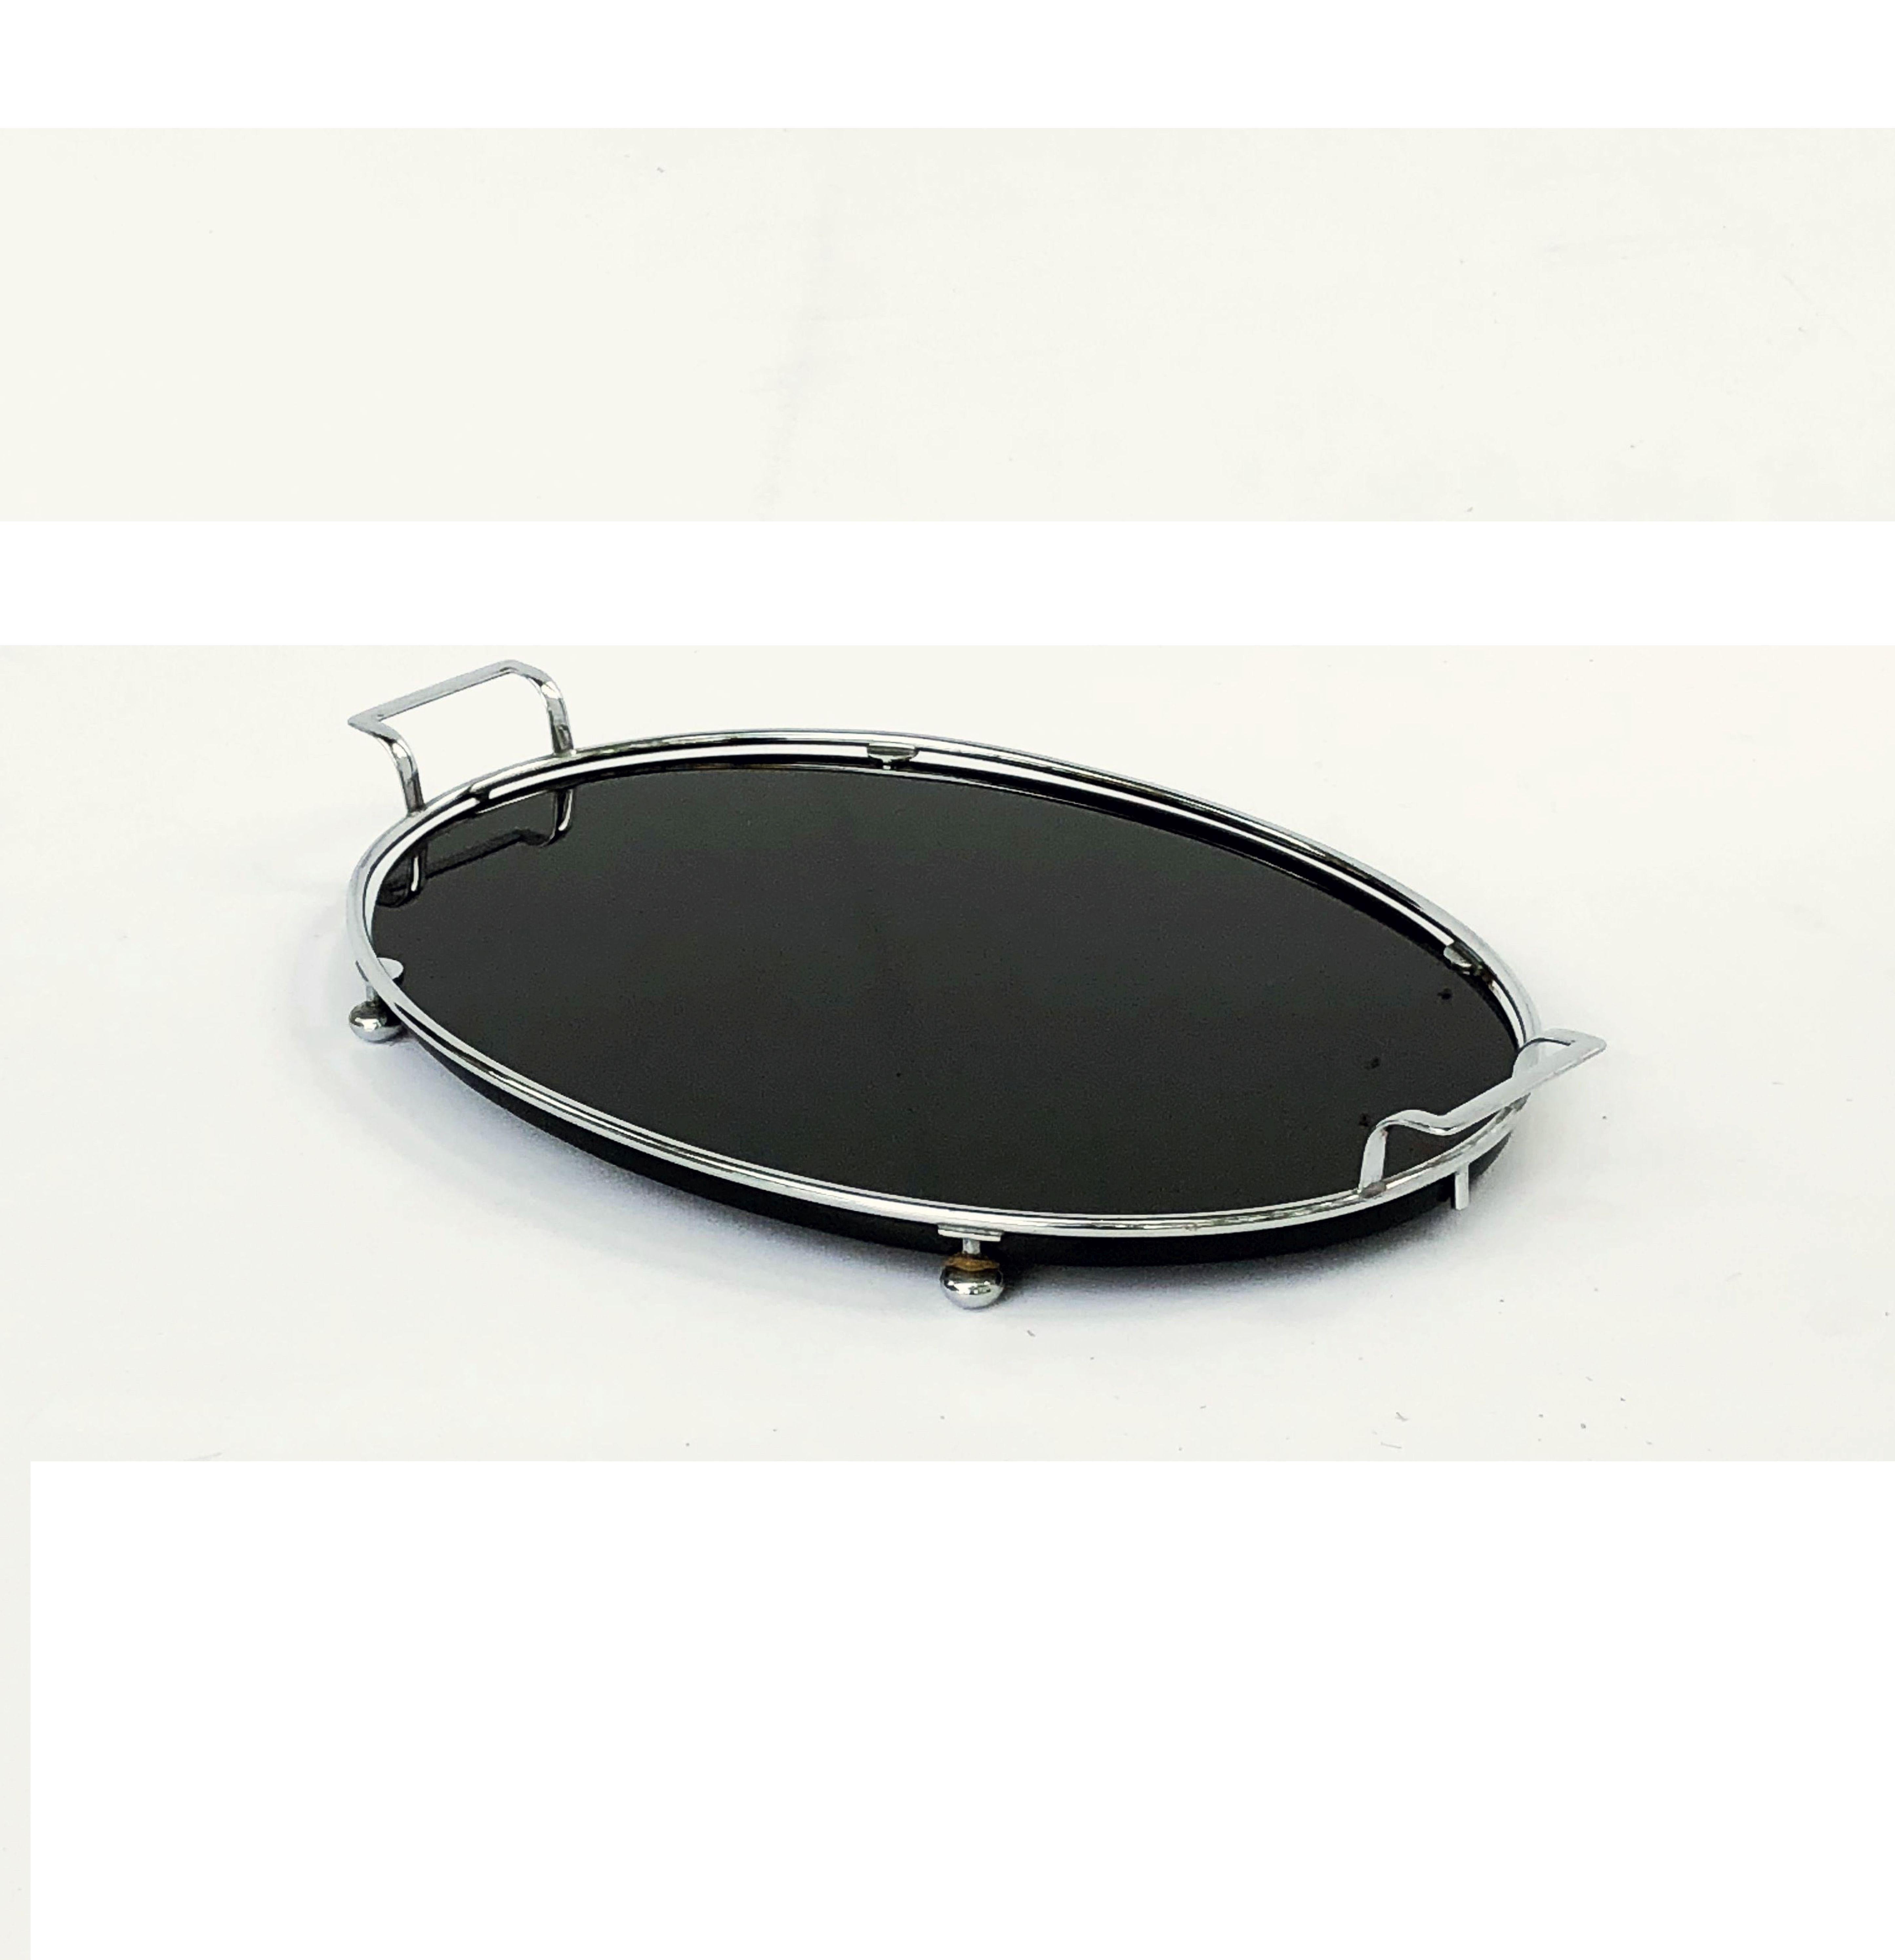 English Oval Serving Tray of Black Glass and Chrome from the Art Deco Period 6